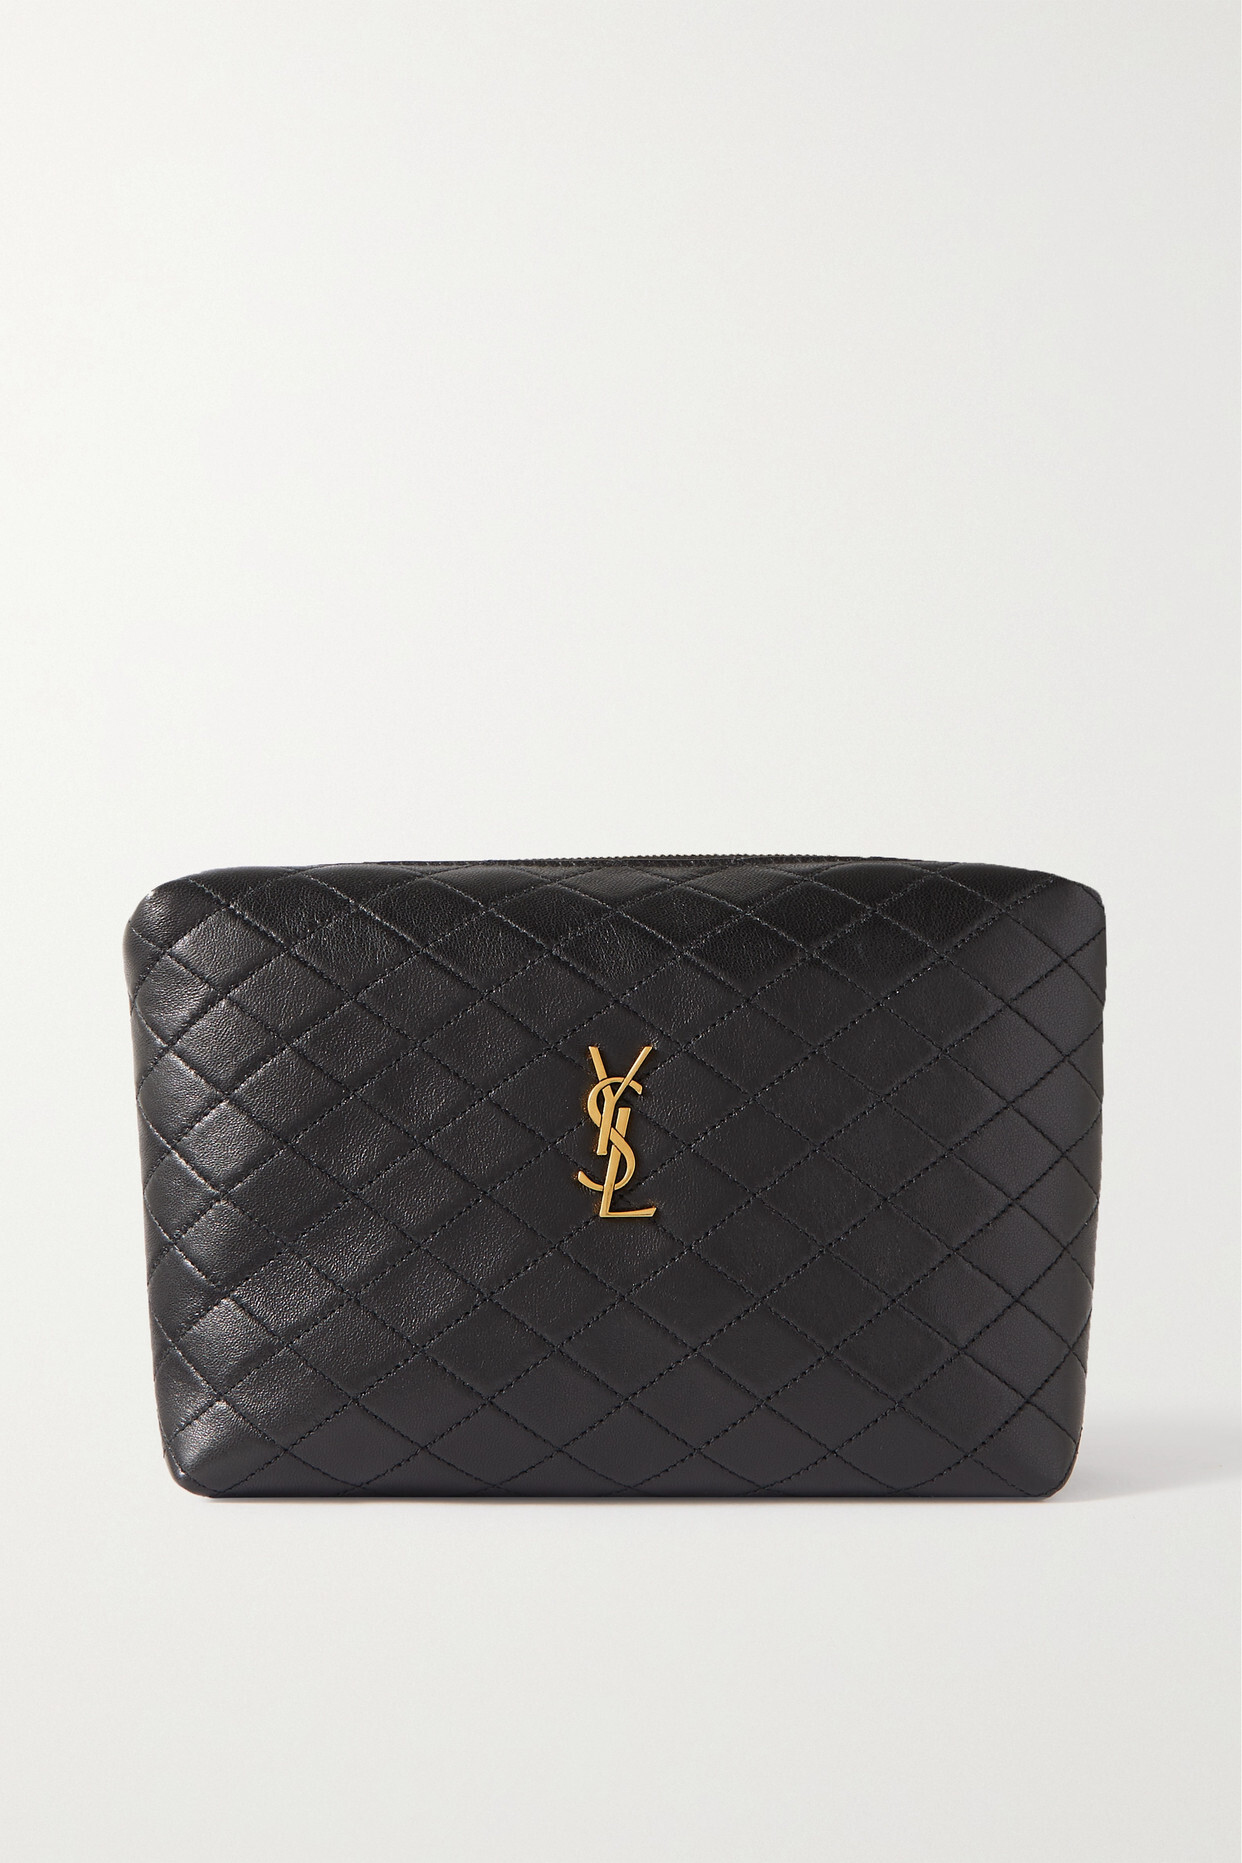 SAINT LAURENT - Quilted Textured-leather Pouch - Black